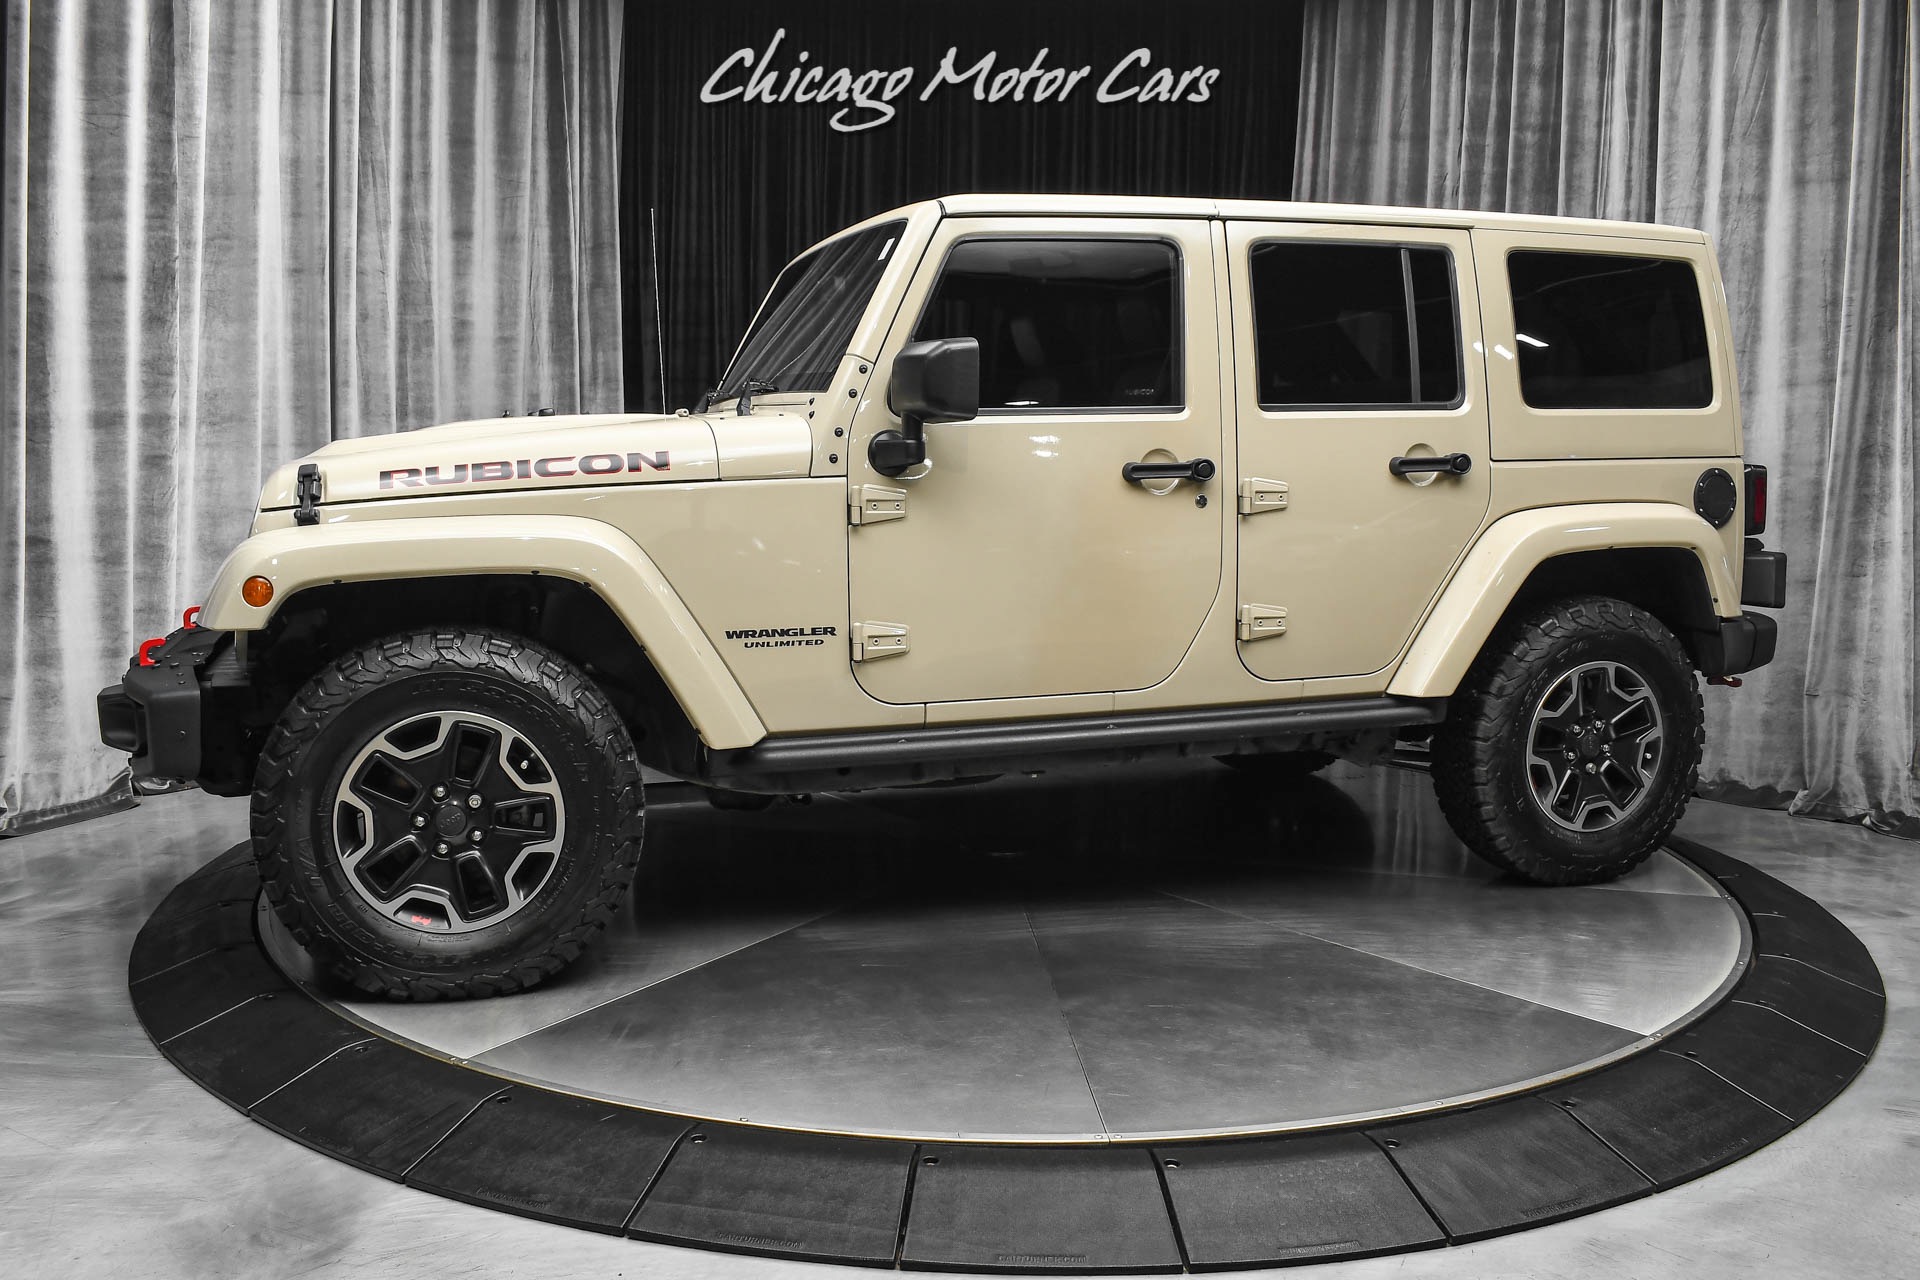 Used 2016 Jeep Wrangler Unlimited Rubicon Hard Rock RARE Mojave Sand!  Serviced! $49k+ MSRP! For Sale (Special Pricing) | Chicago Motor Cars Stock  #19120